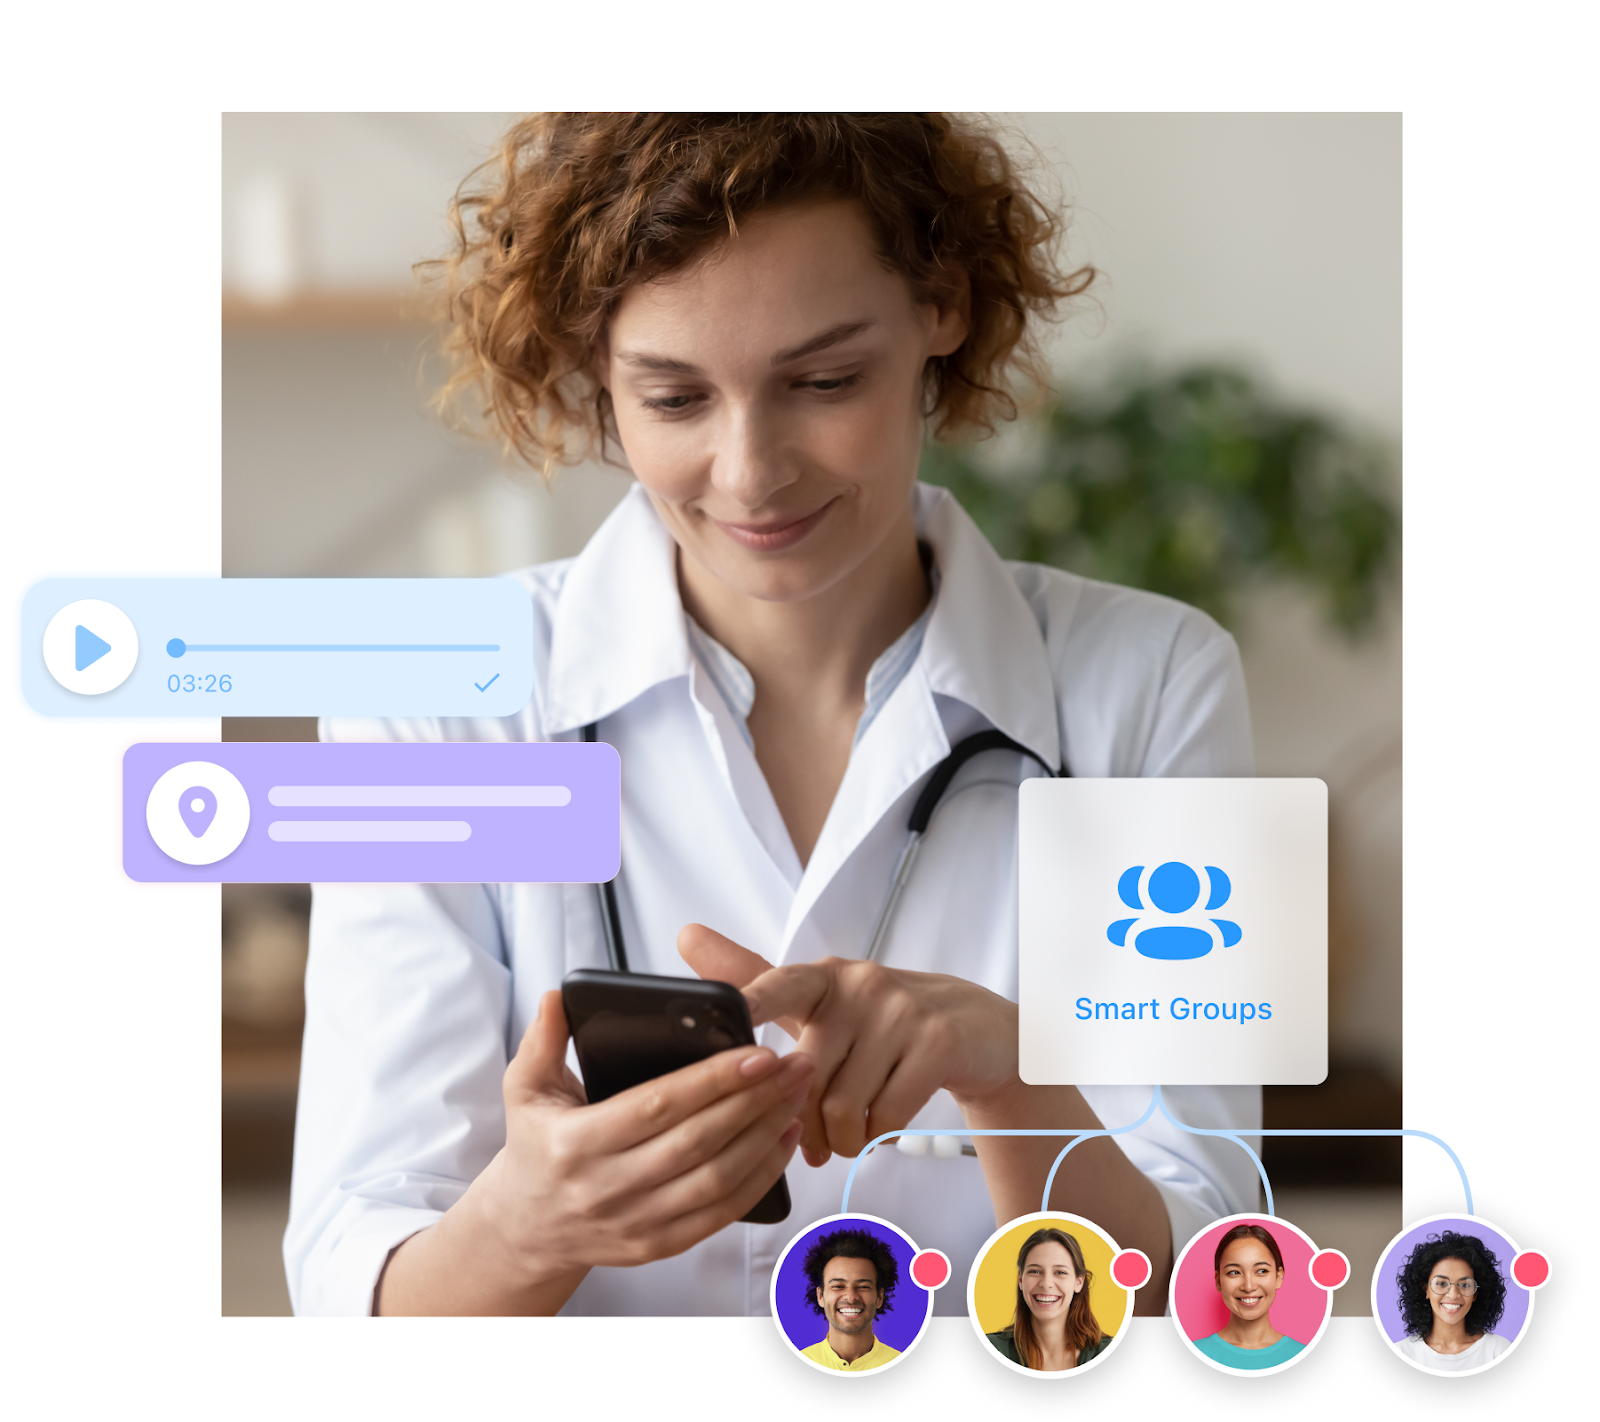 Employee using Connecteam's employee communication app to communicate with her team